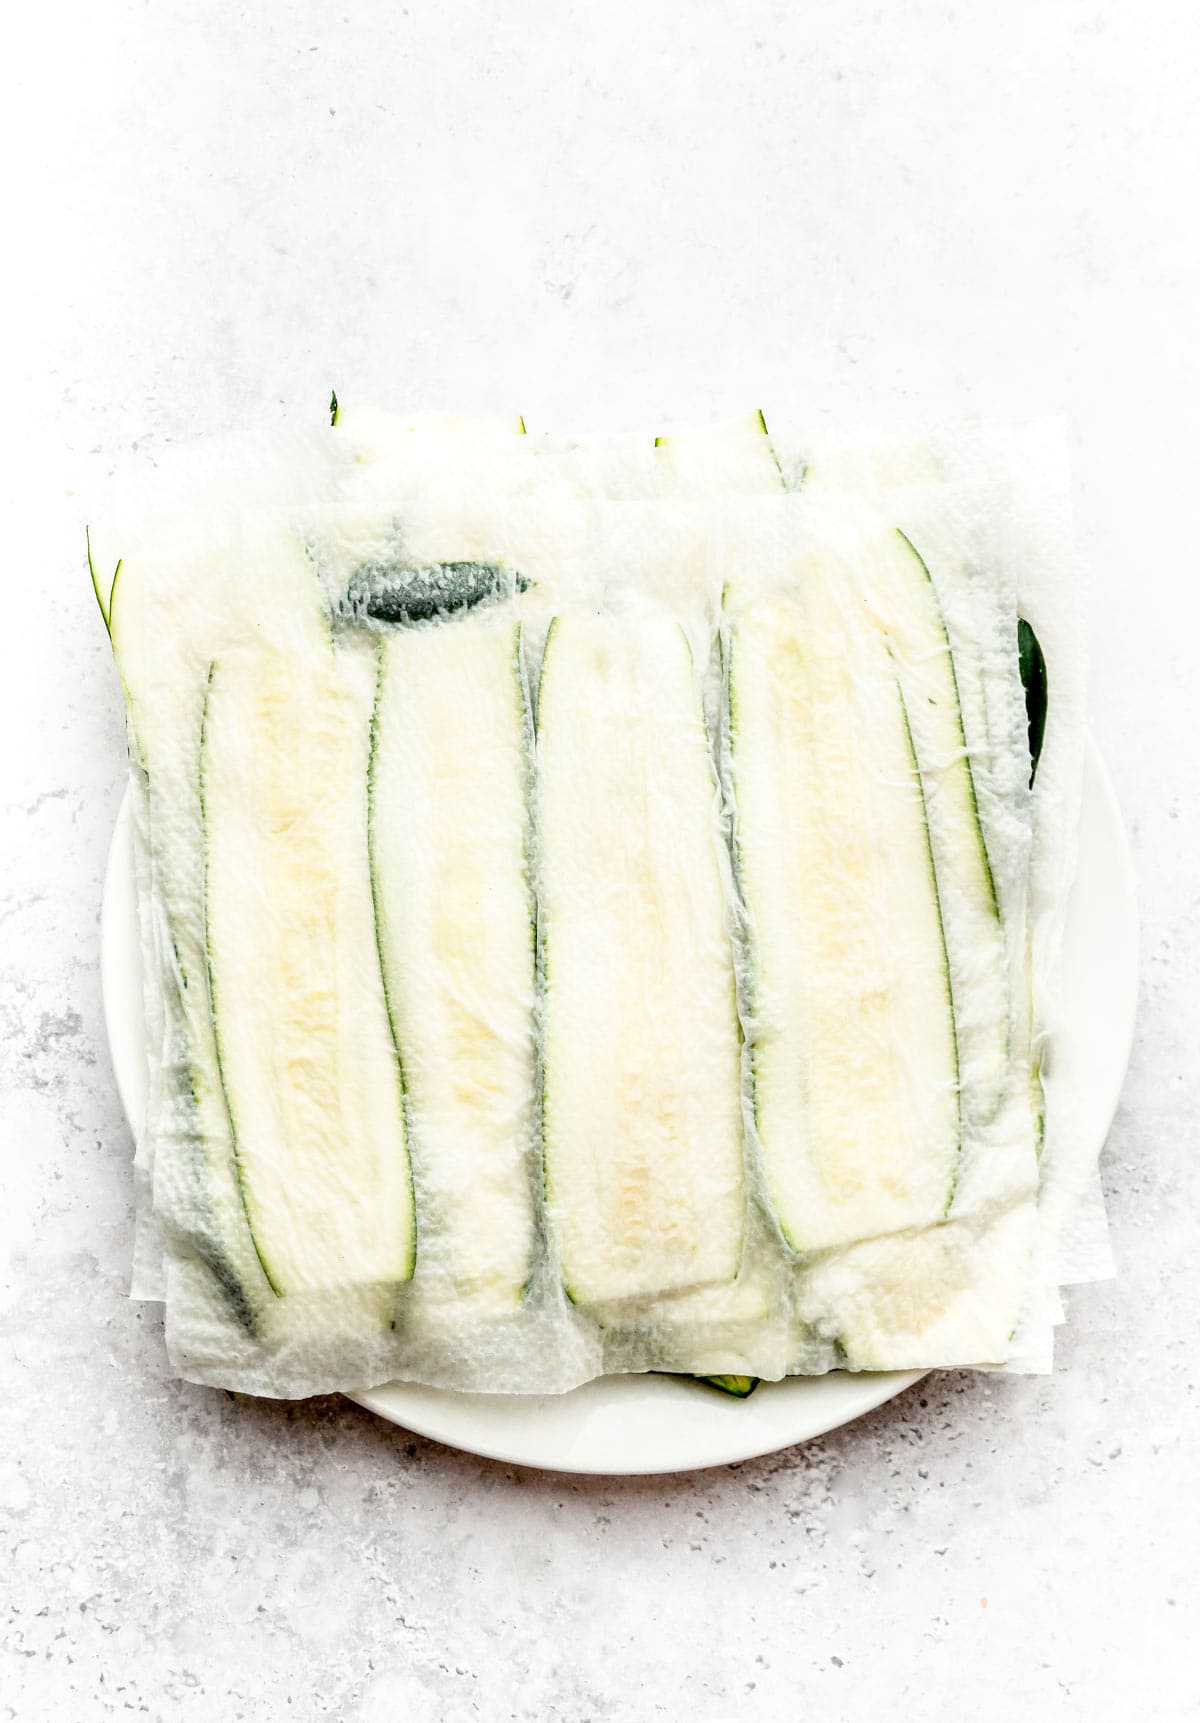 A paper towel absorbing excess moisture from zucchini noodles.